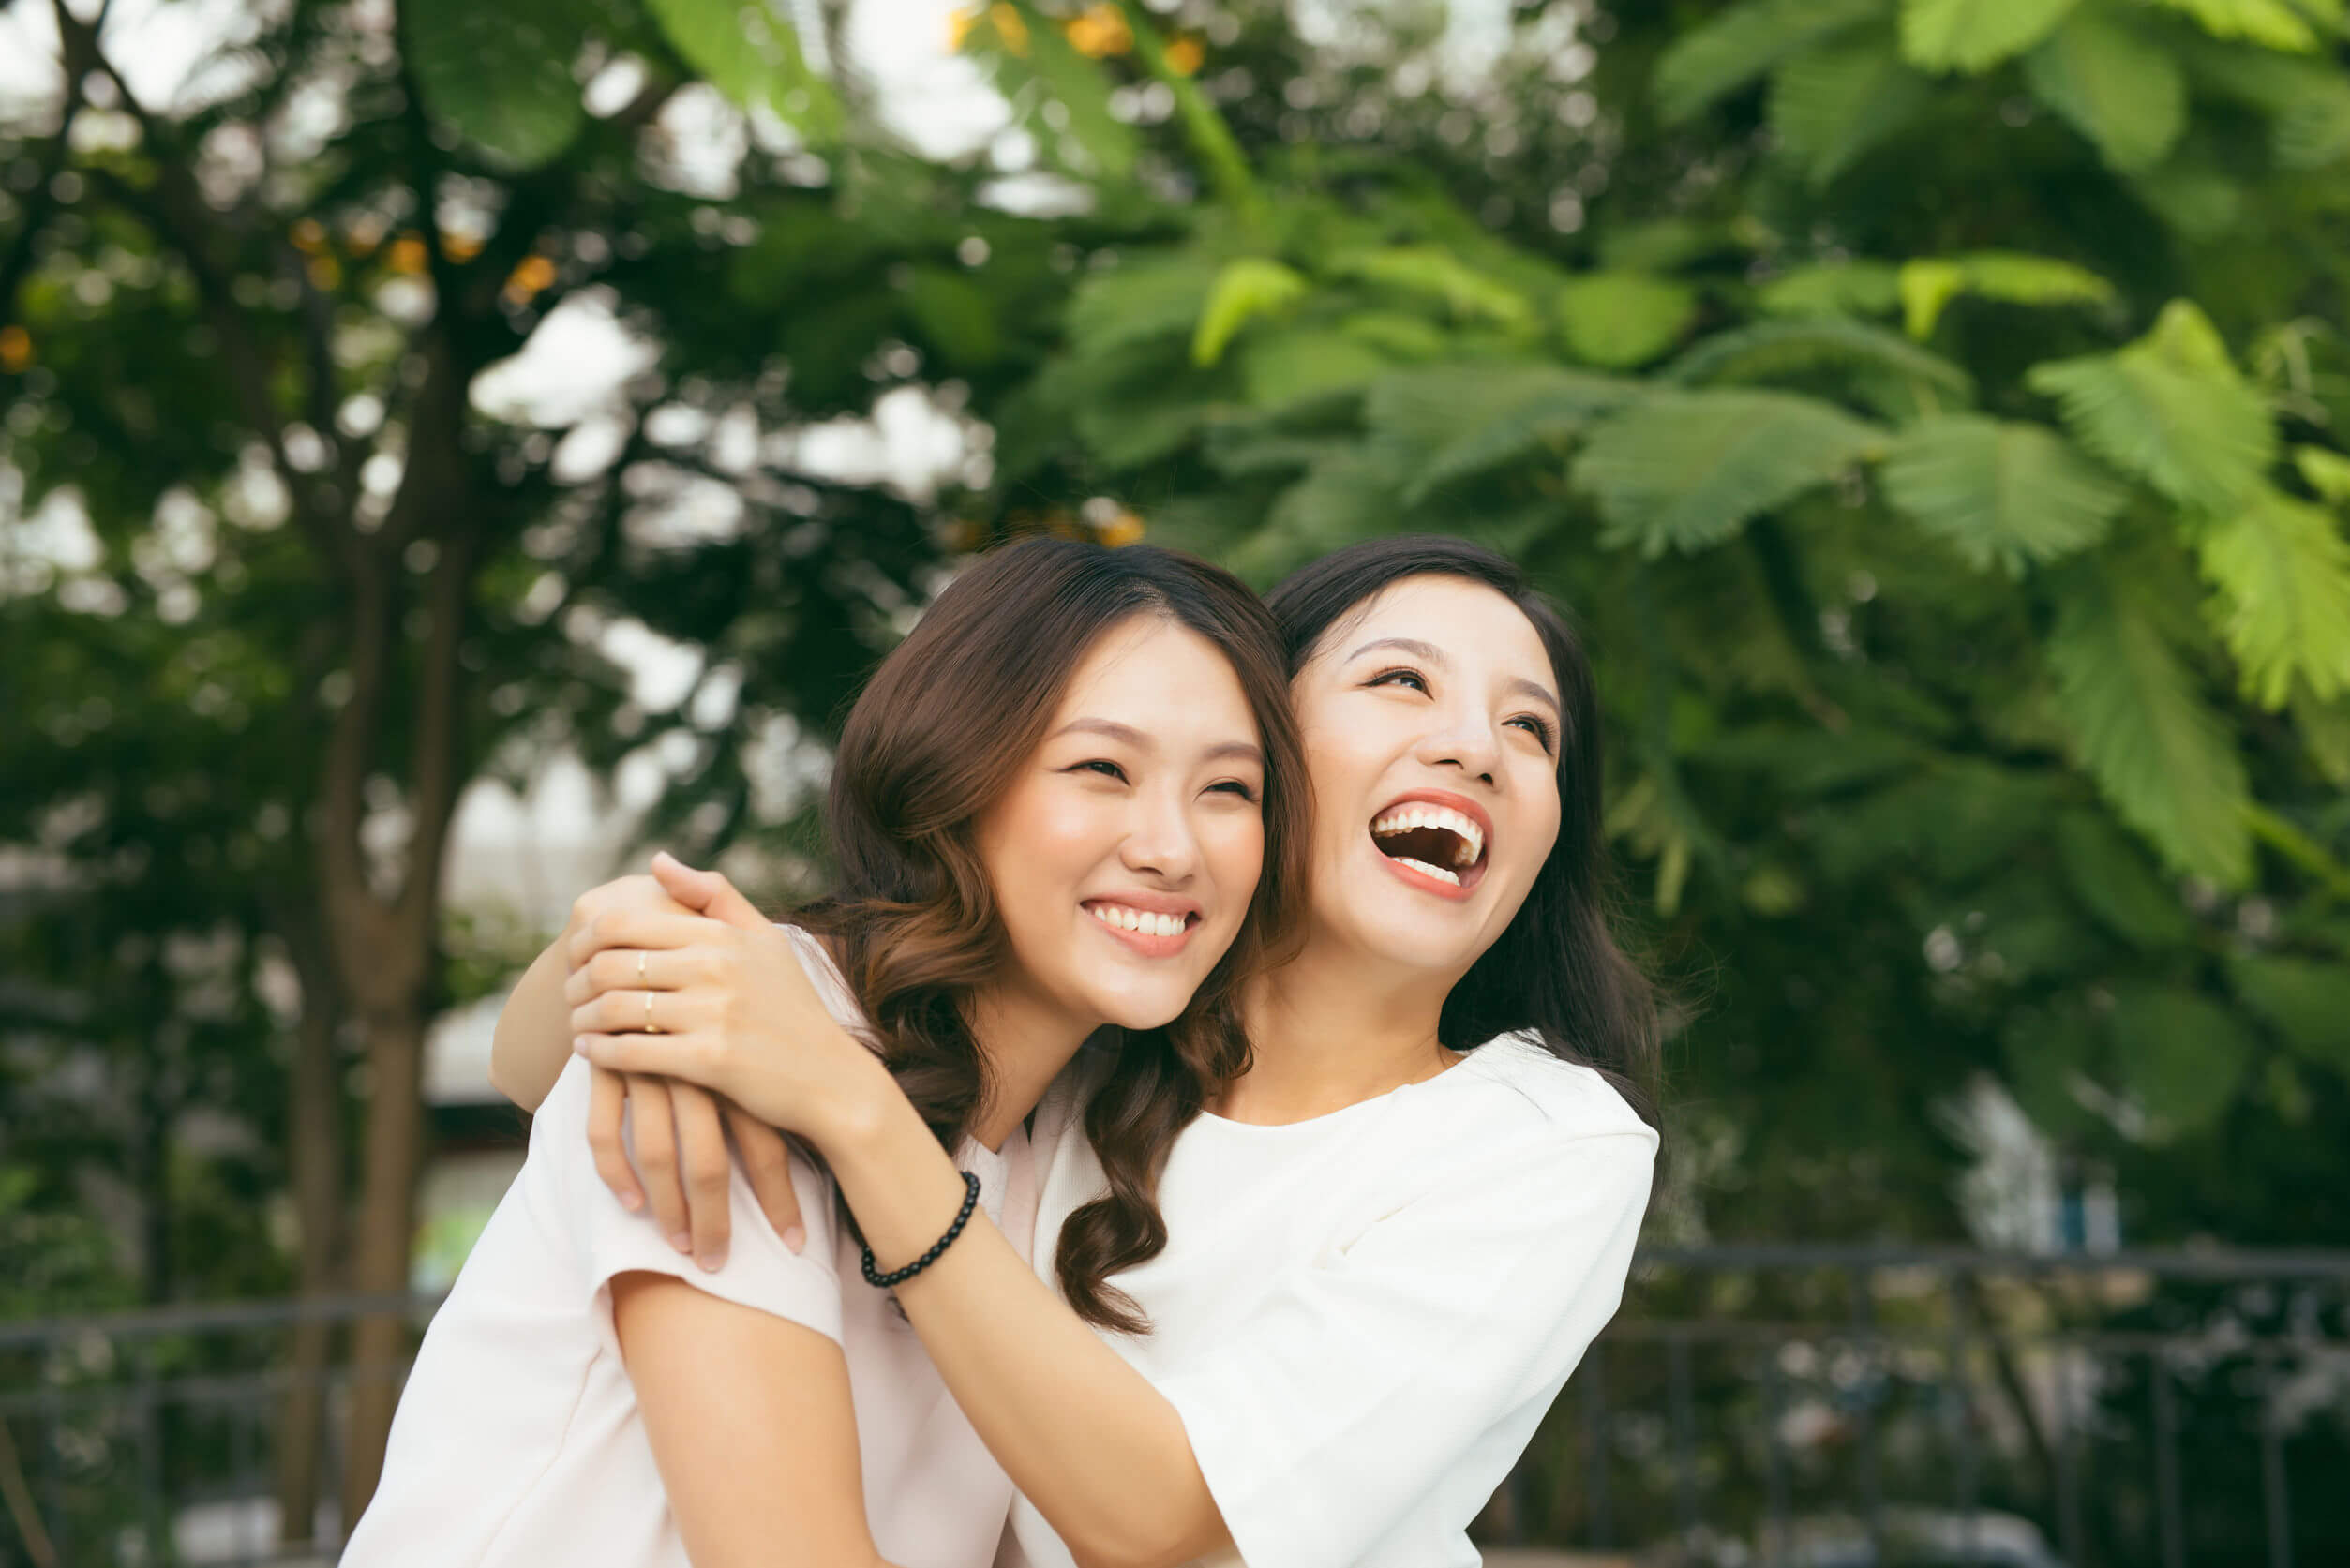 Two Asian women laughing and embracing.